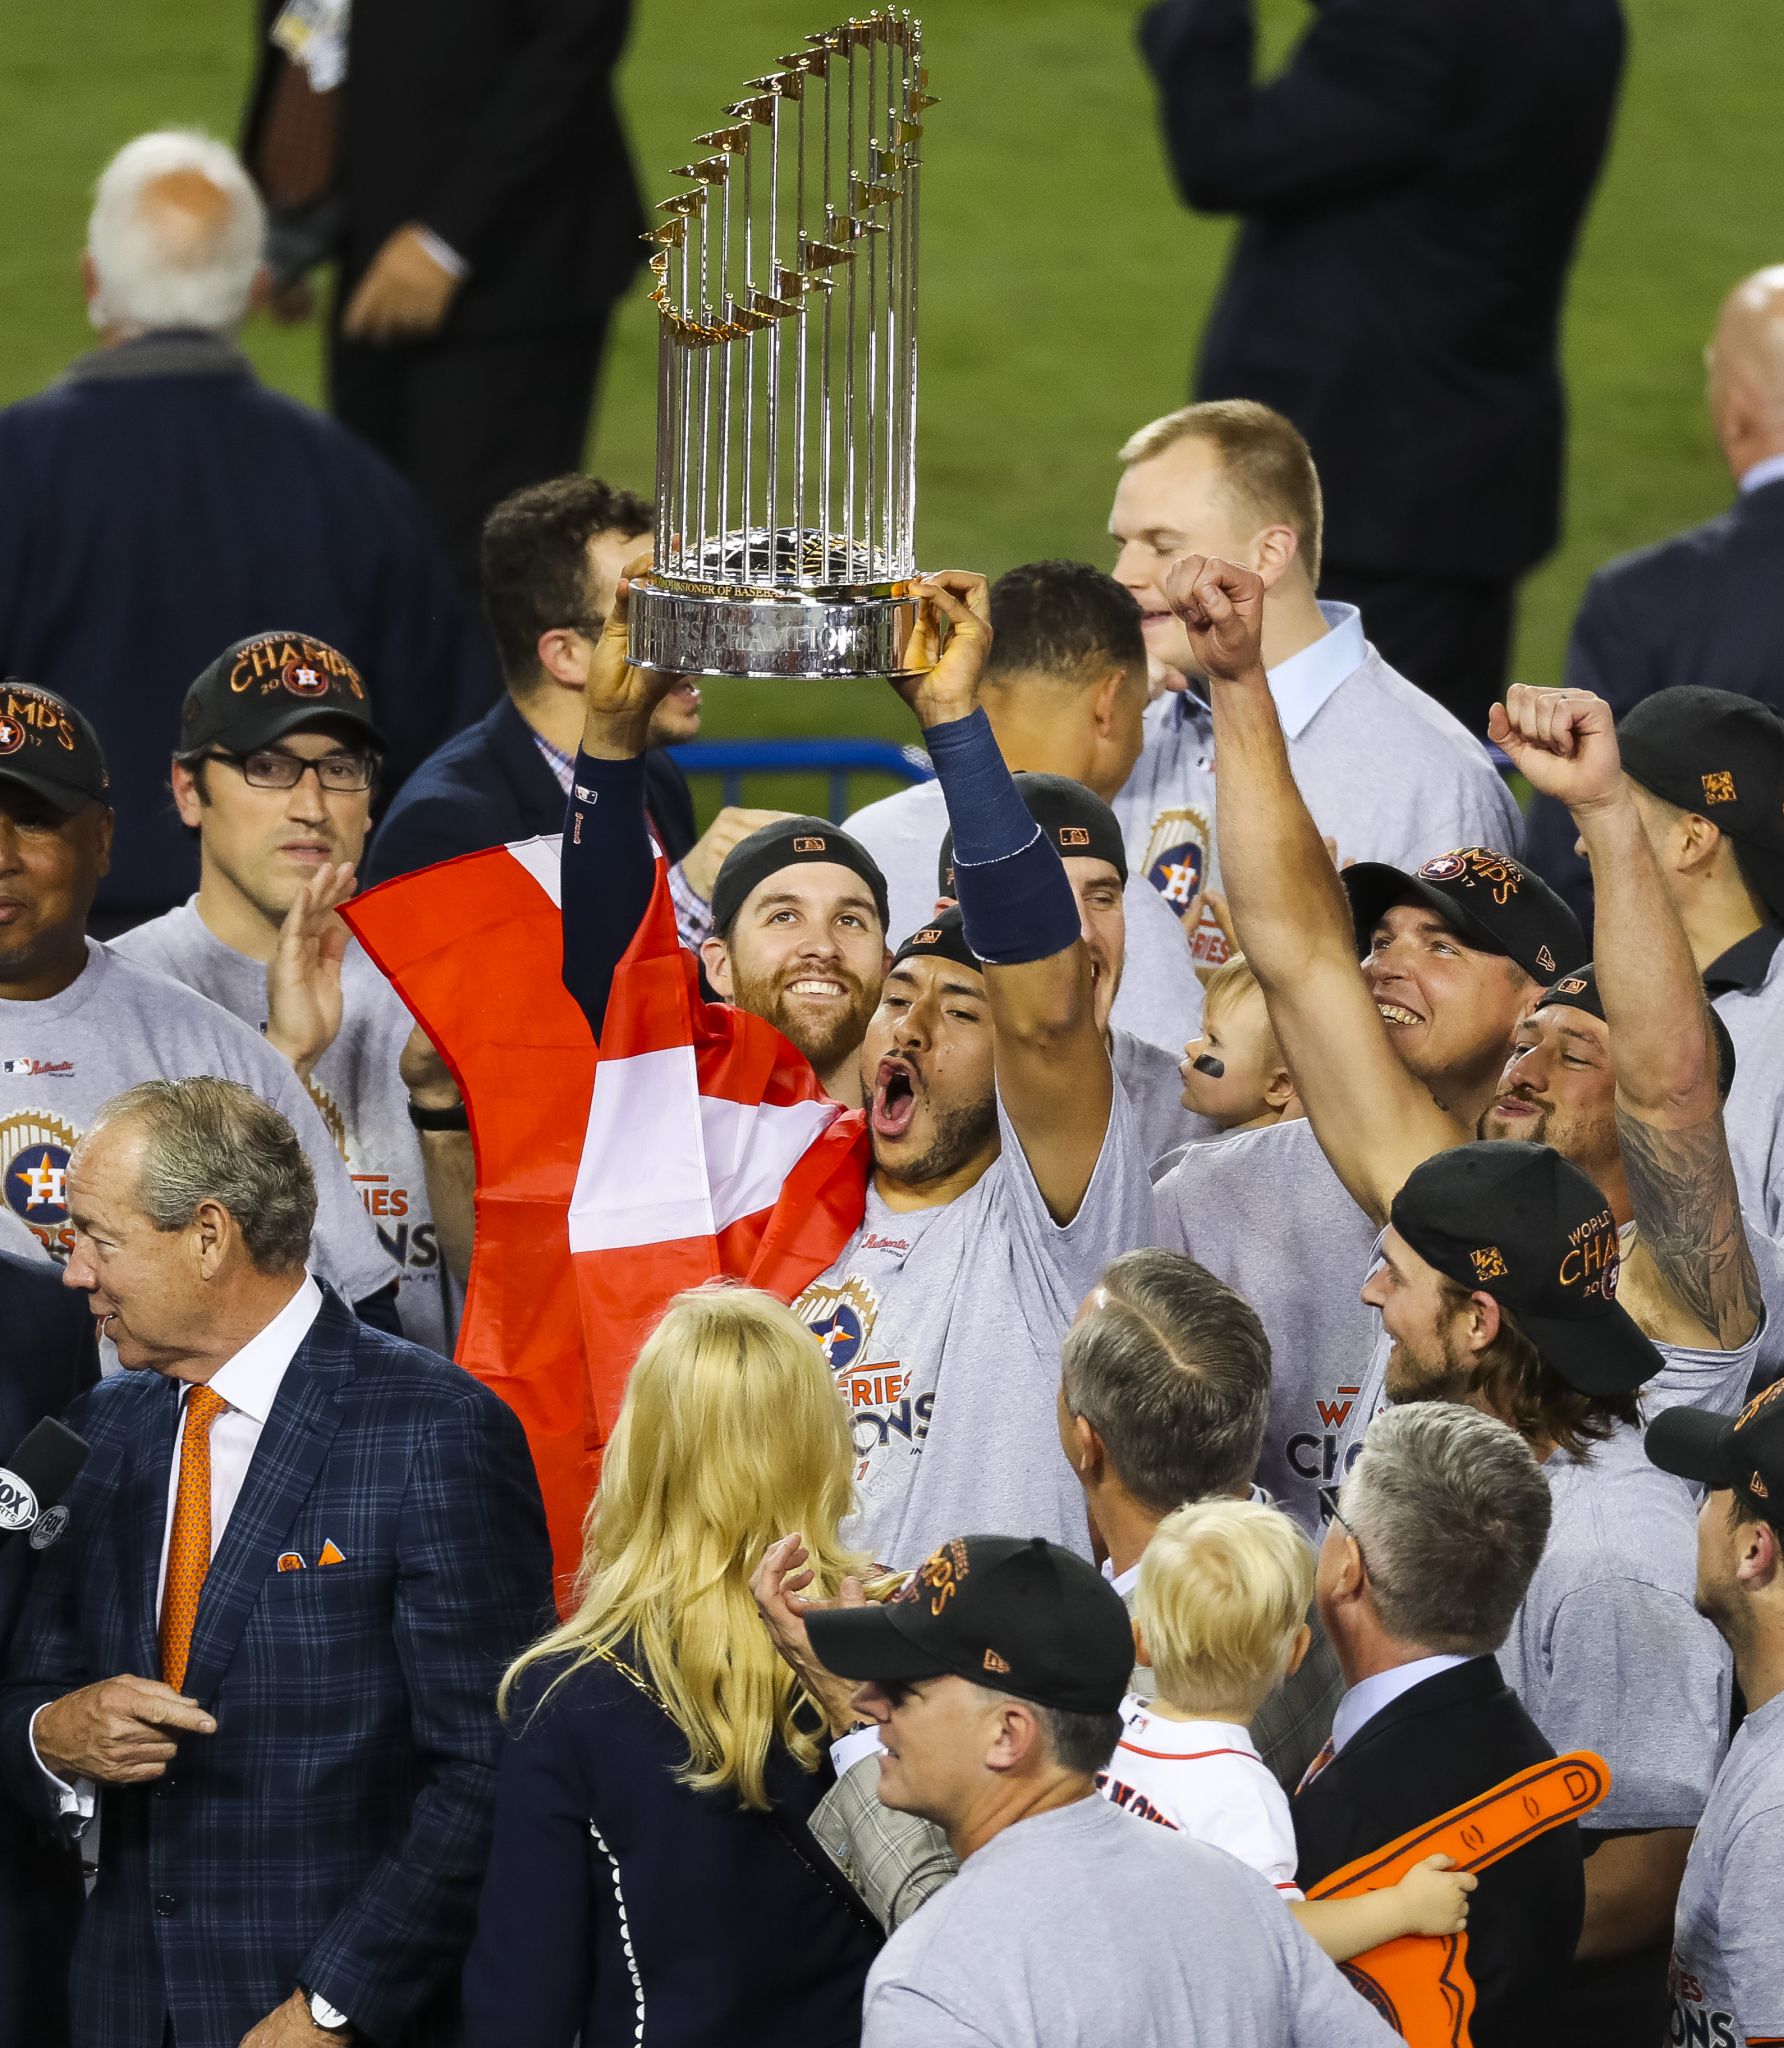 Get a peek at the Houston Astros World Series Championship gear